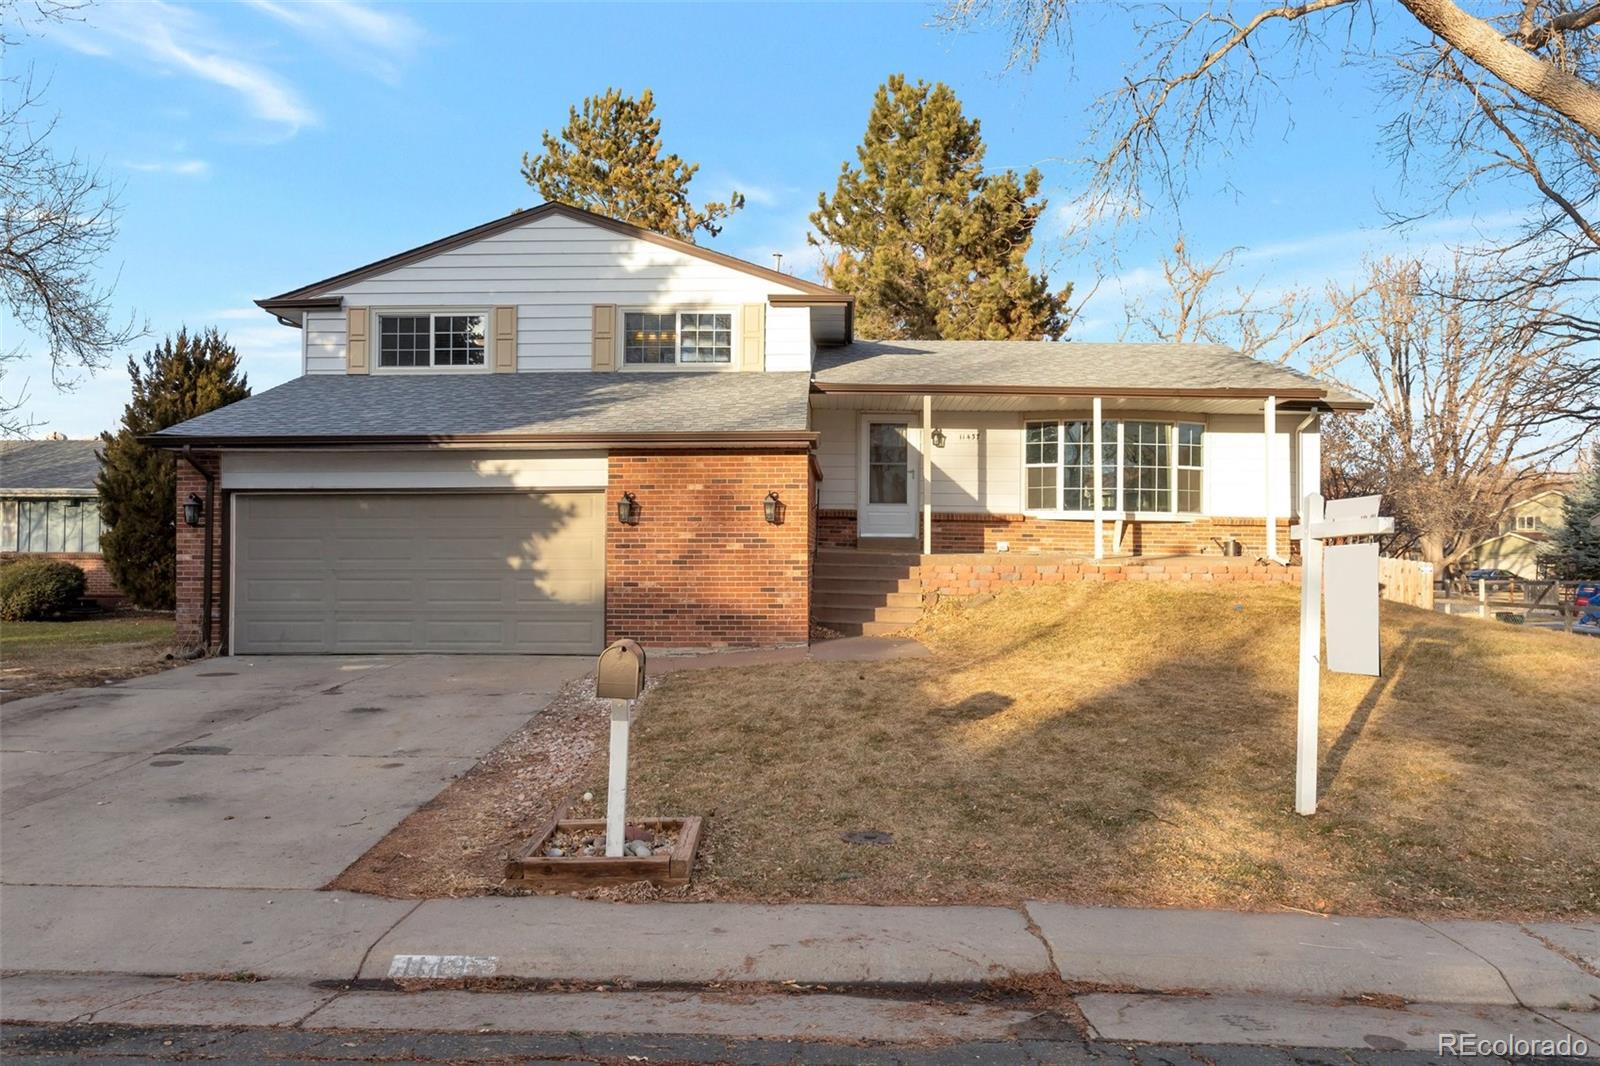 Report Image for 11437 W 69th Place,Arvada, Colorado